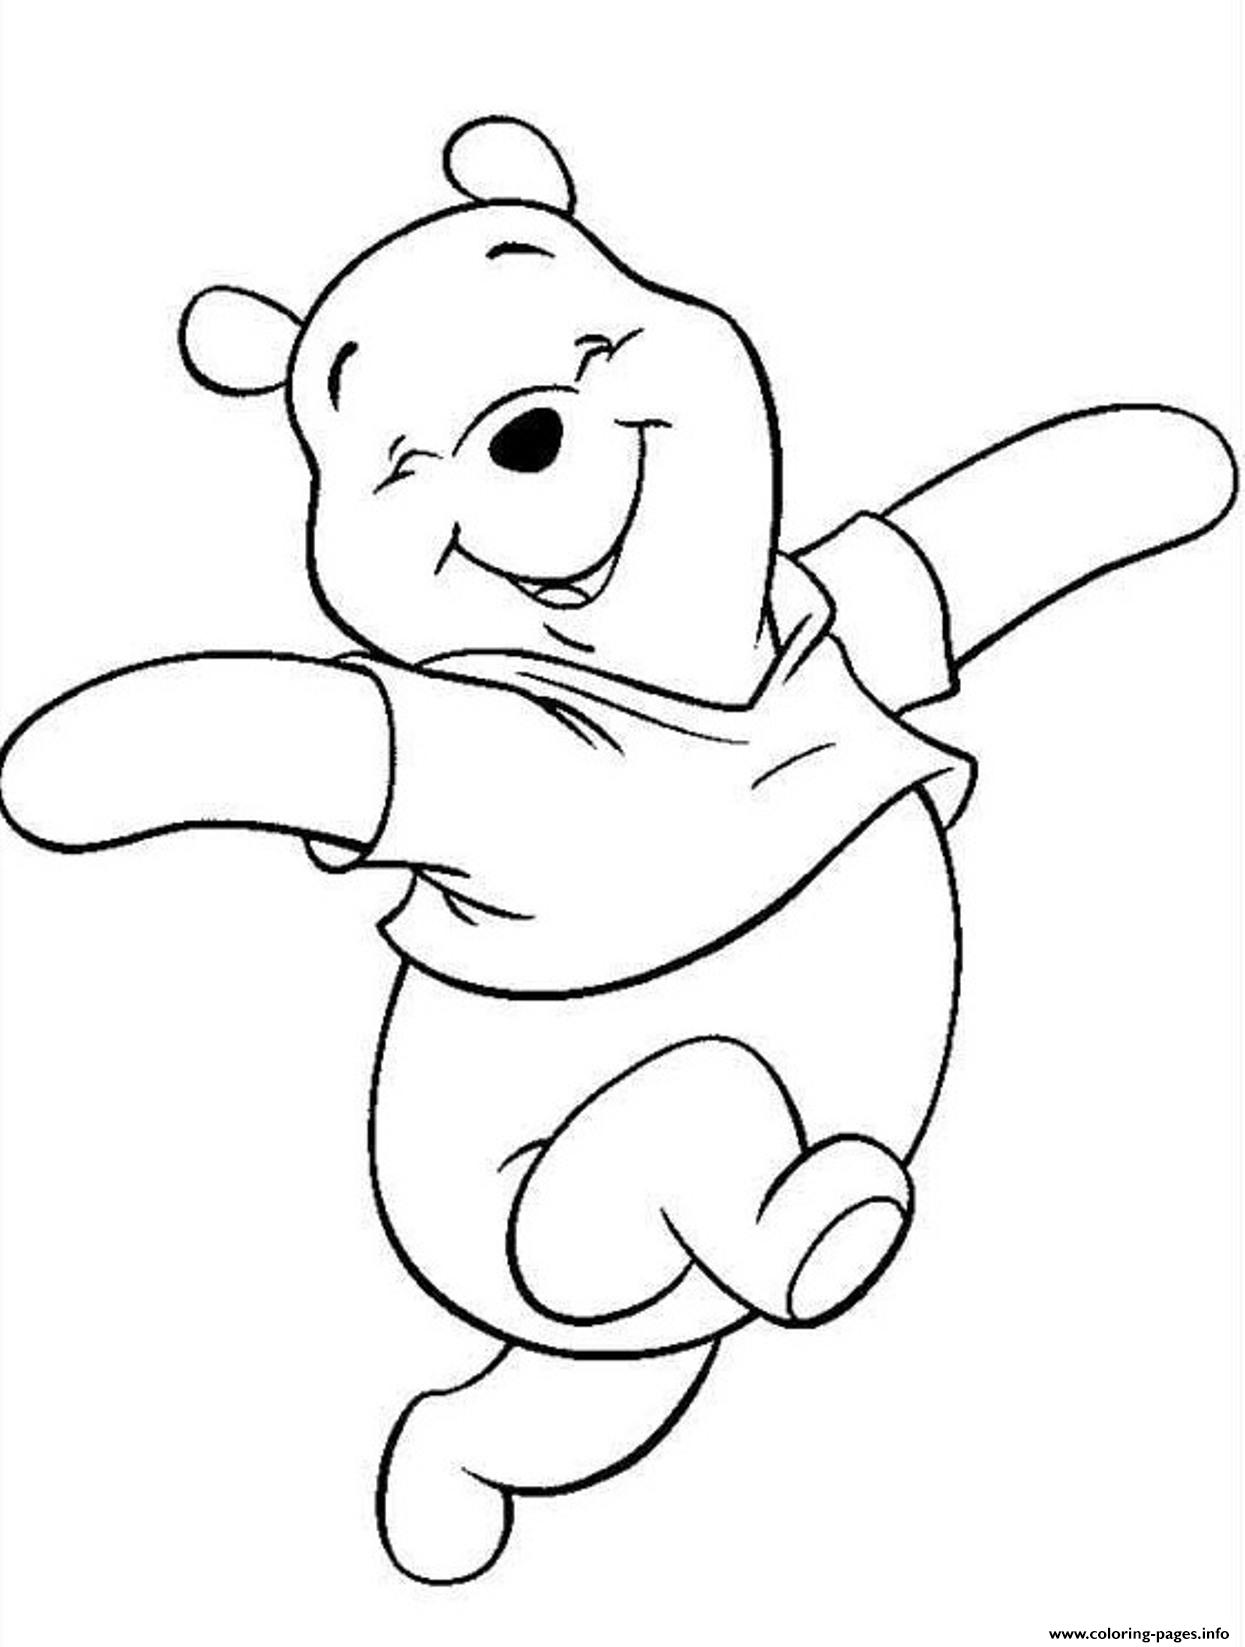 Happy Winnie The Pooh Sd388 coloring